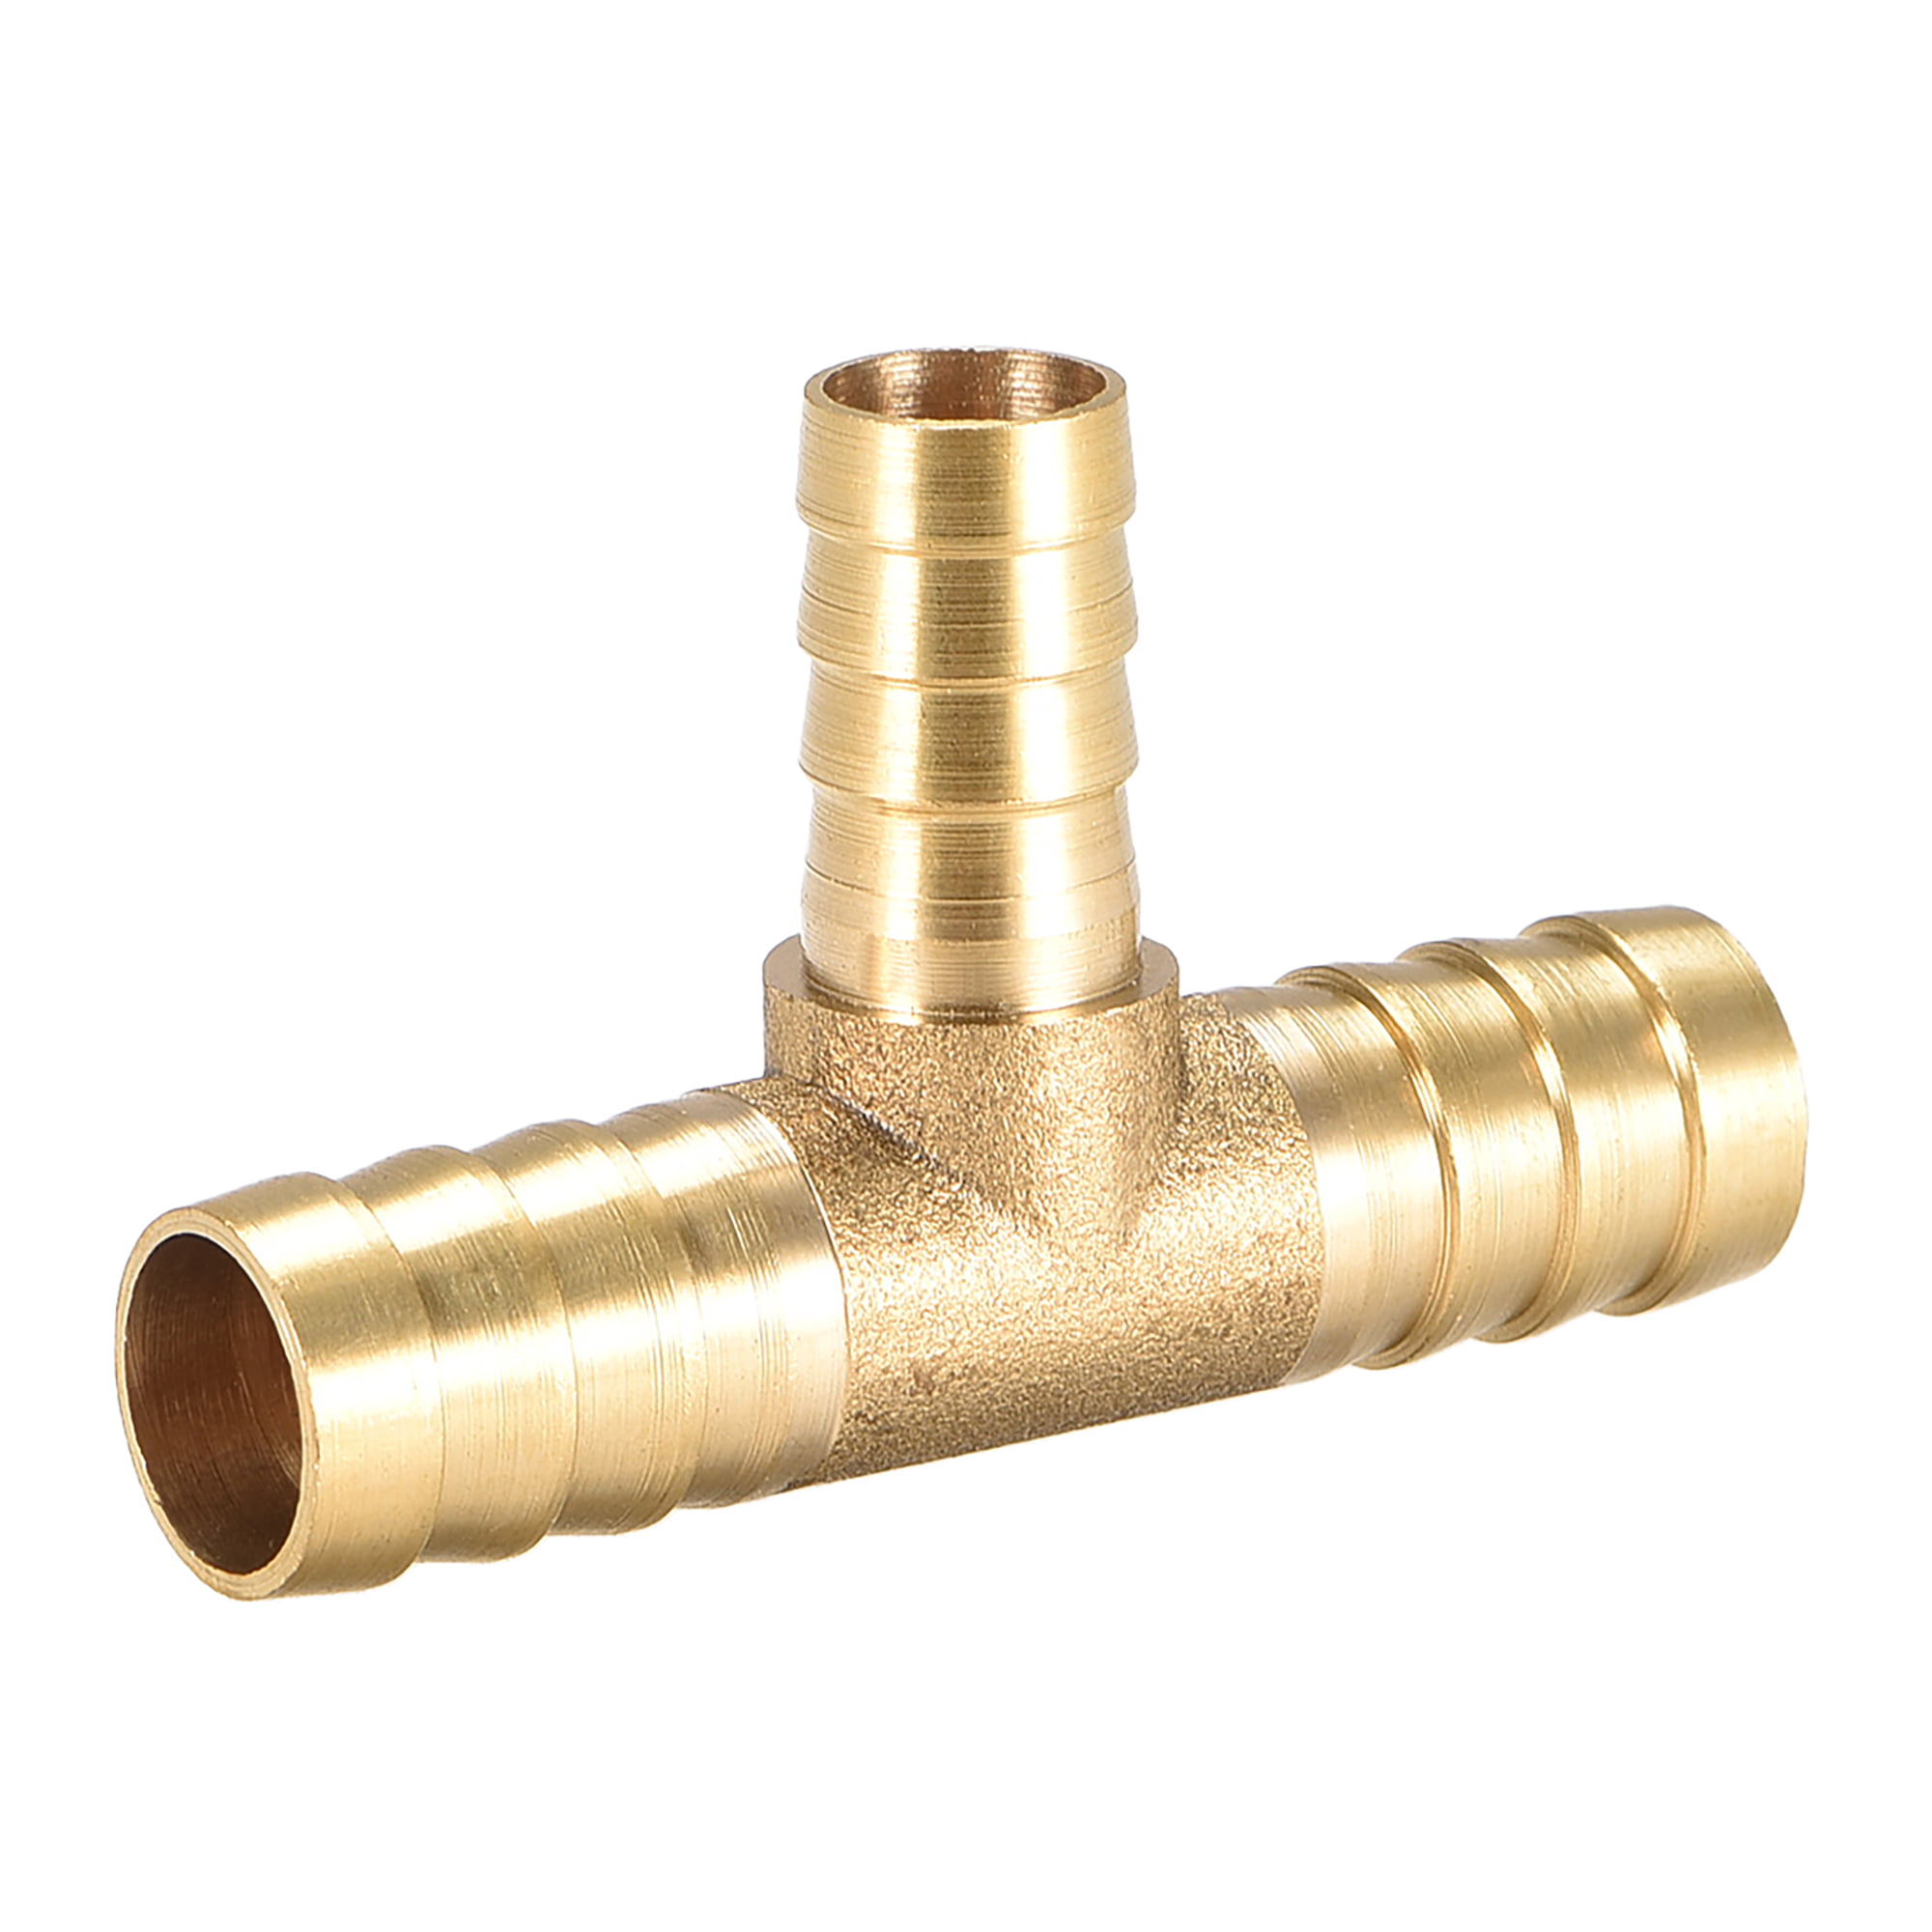 2 PCS 3/4 HOSE BARB TEE Brass Pipe 3 WAY T Fitting Thread Gas Fuel Water Air 